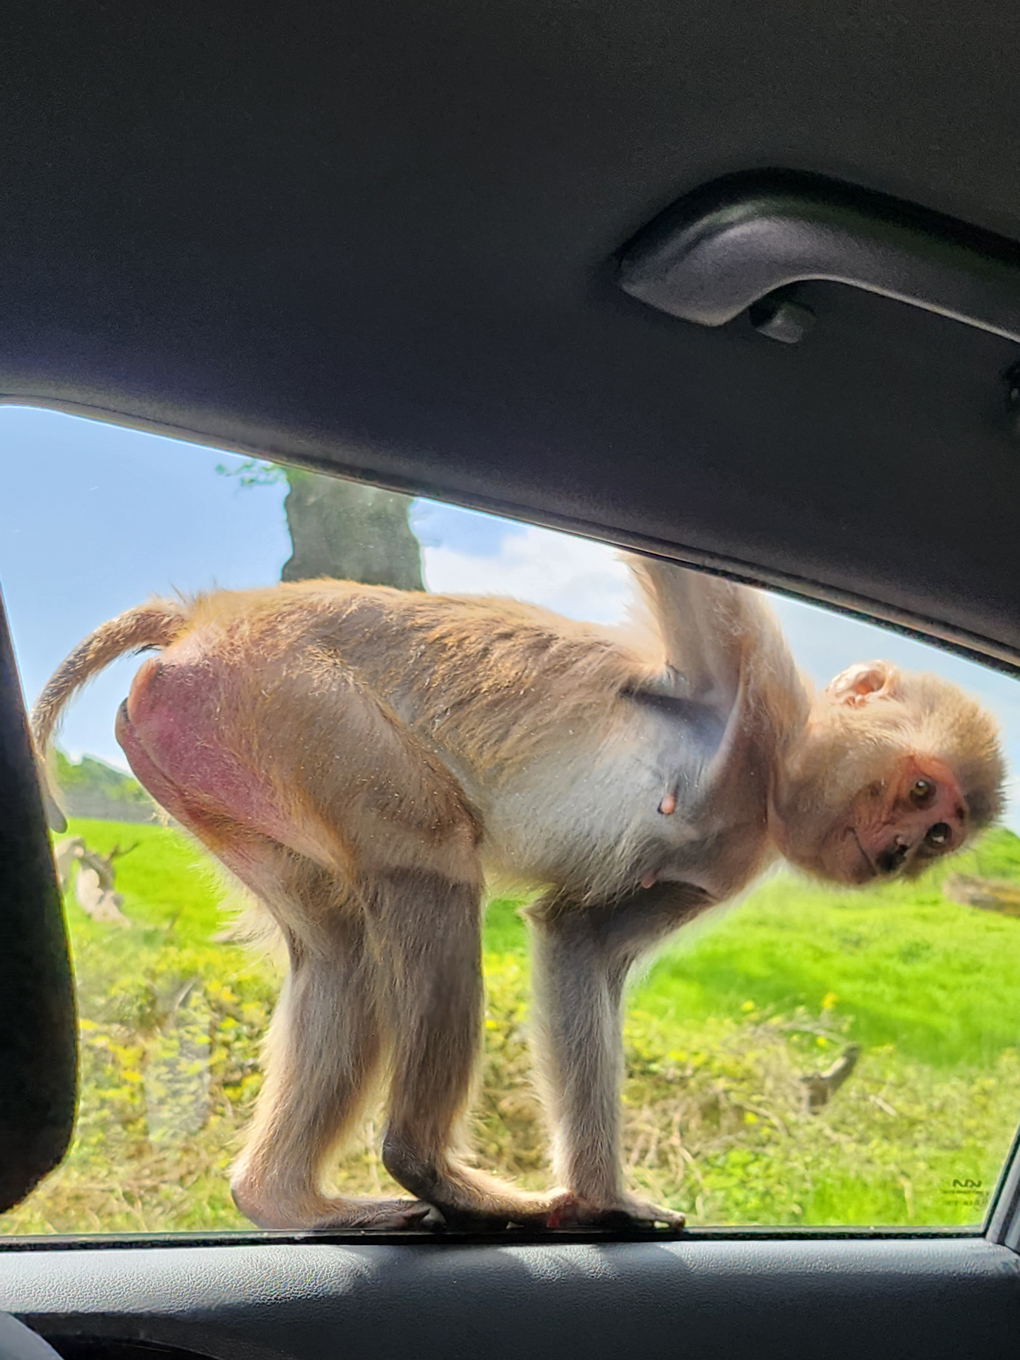 A female Macaque monkey appears at the rear passanger window. One arm is raised up holding on to the top of the car. Both of its feet are balanced on the frame of the window. It's crouched so it can see into the car and is looking at the camera.